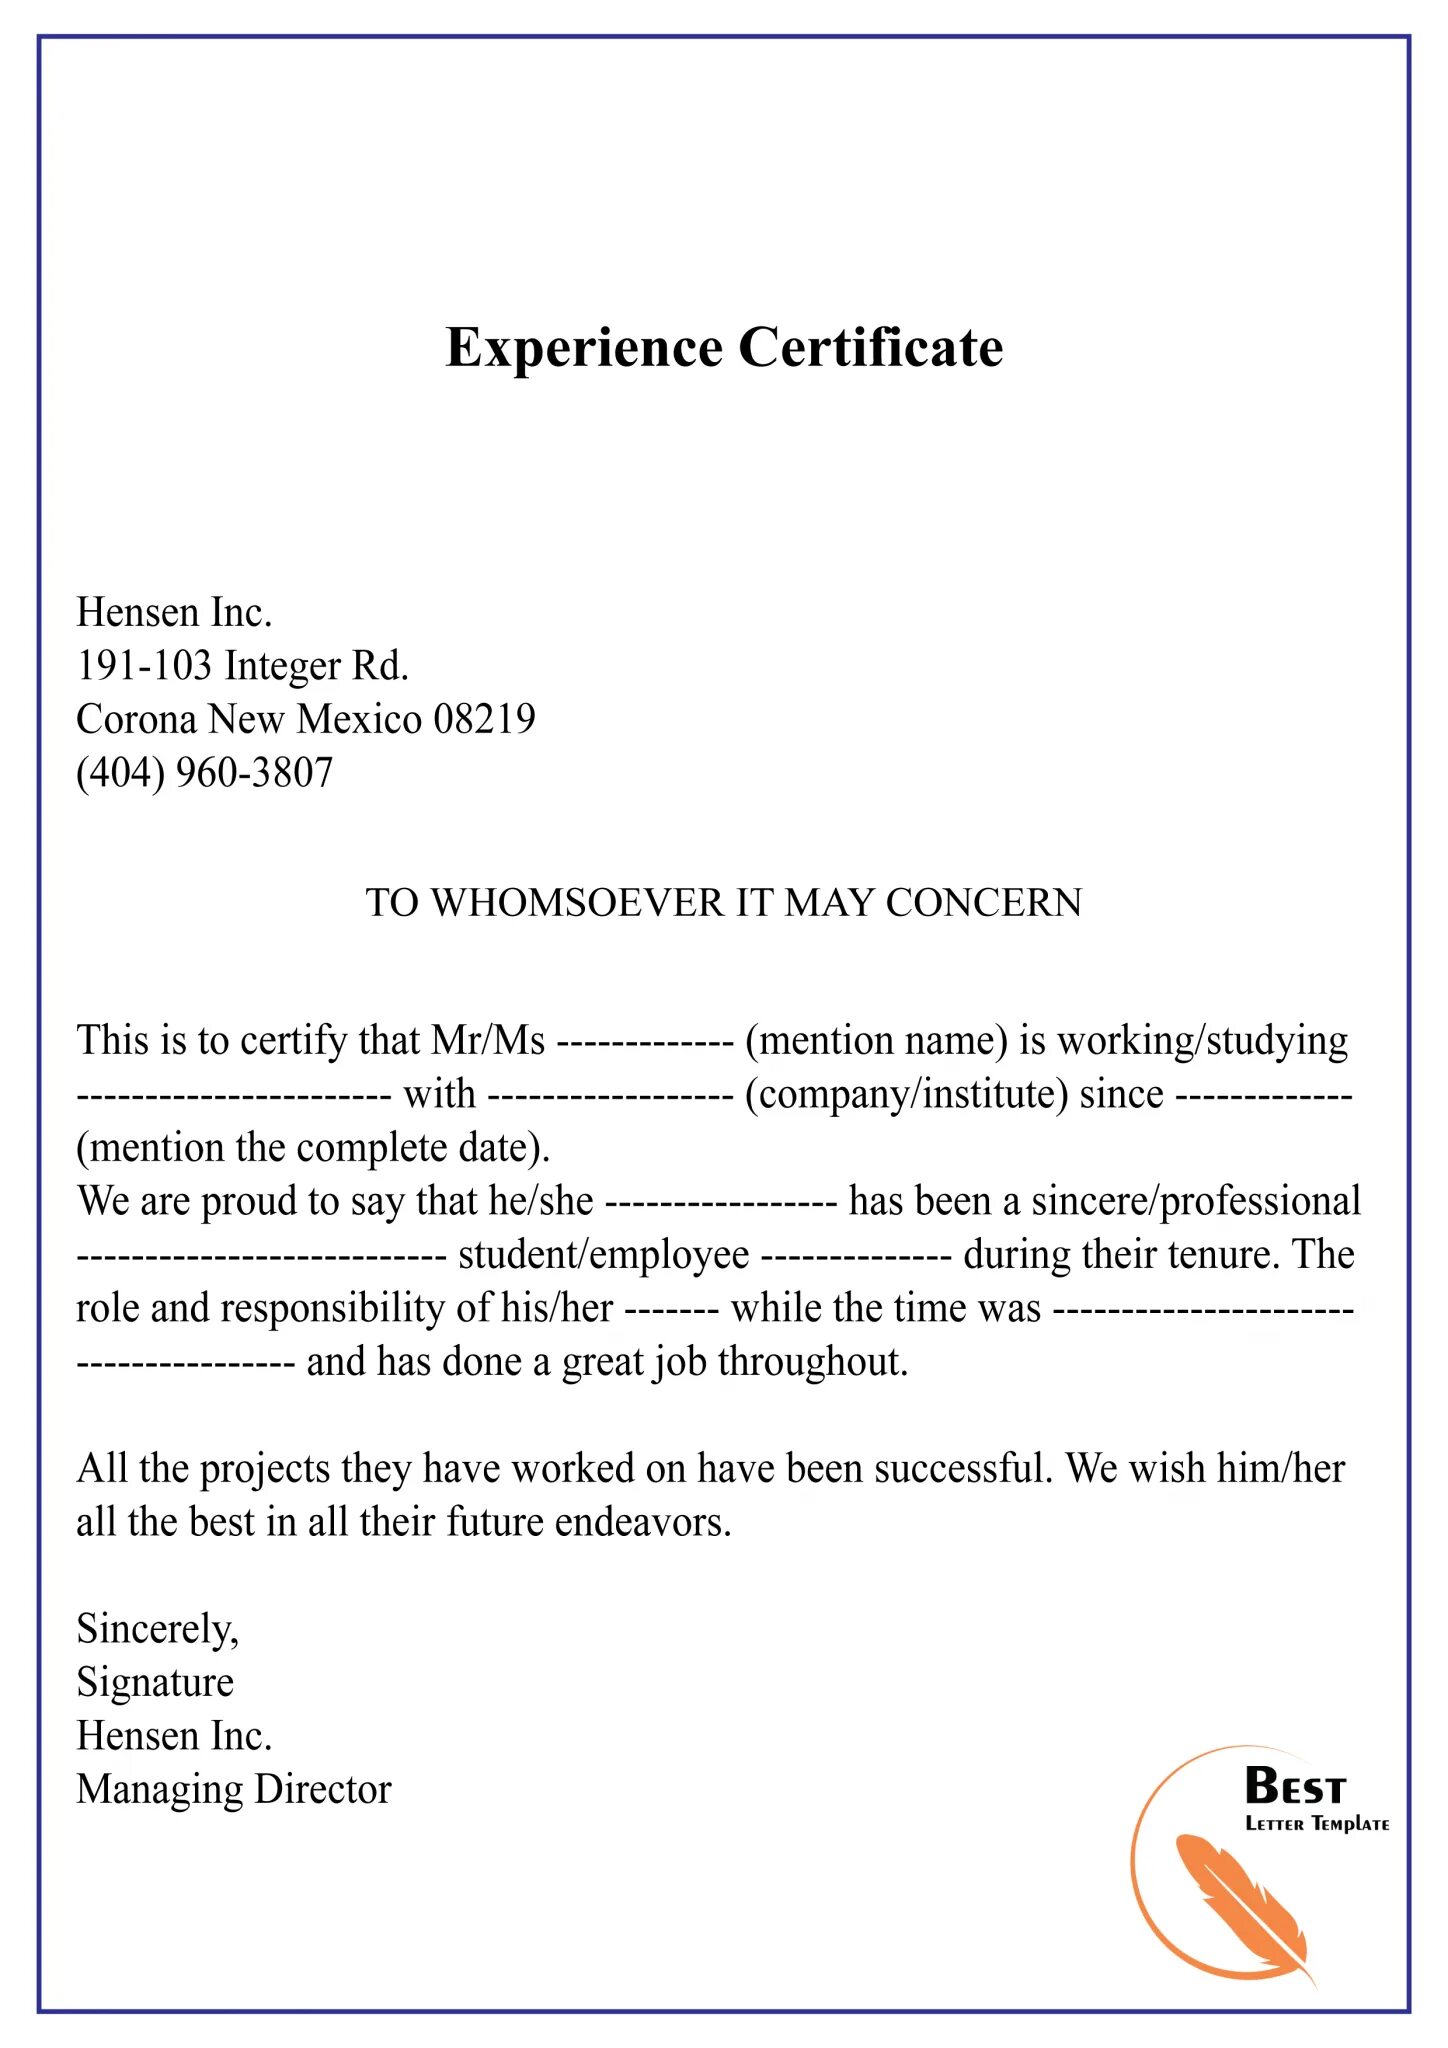 Working experience Certificate. Work experience Certificate. Experience Certificate example. Work experience Certificate examples.